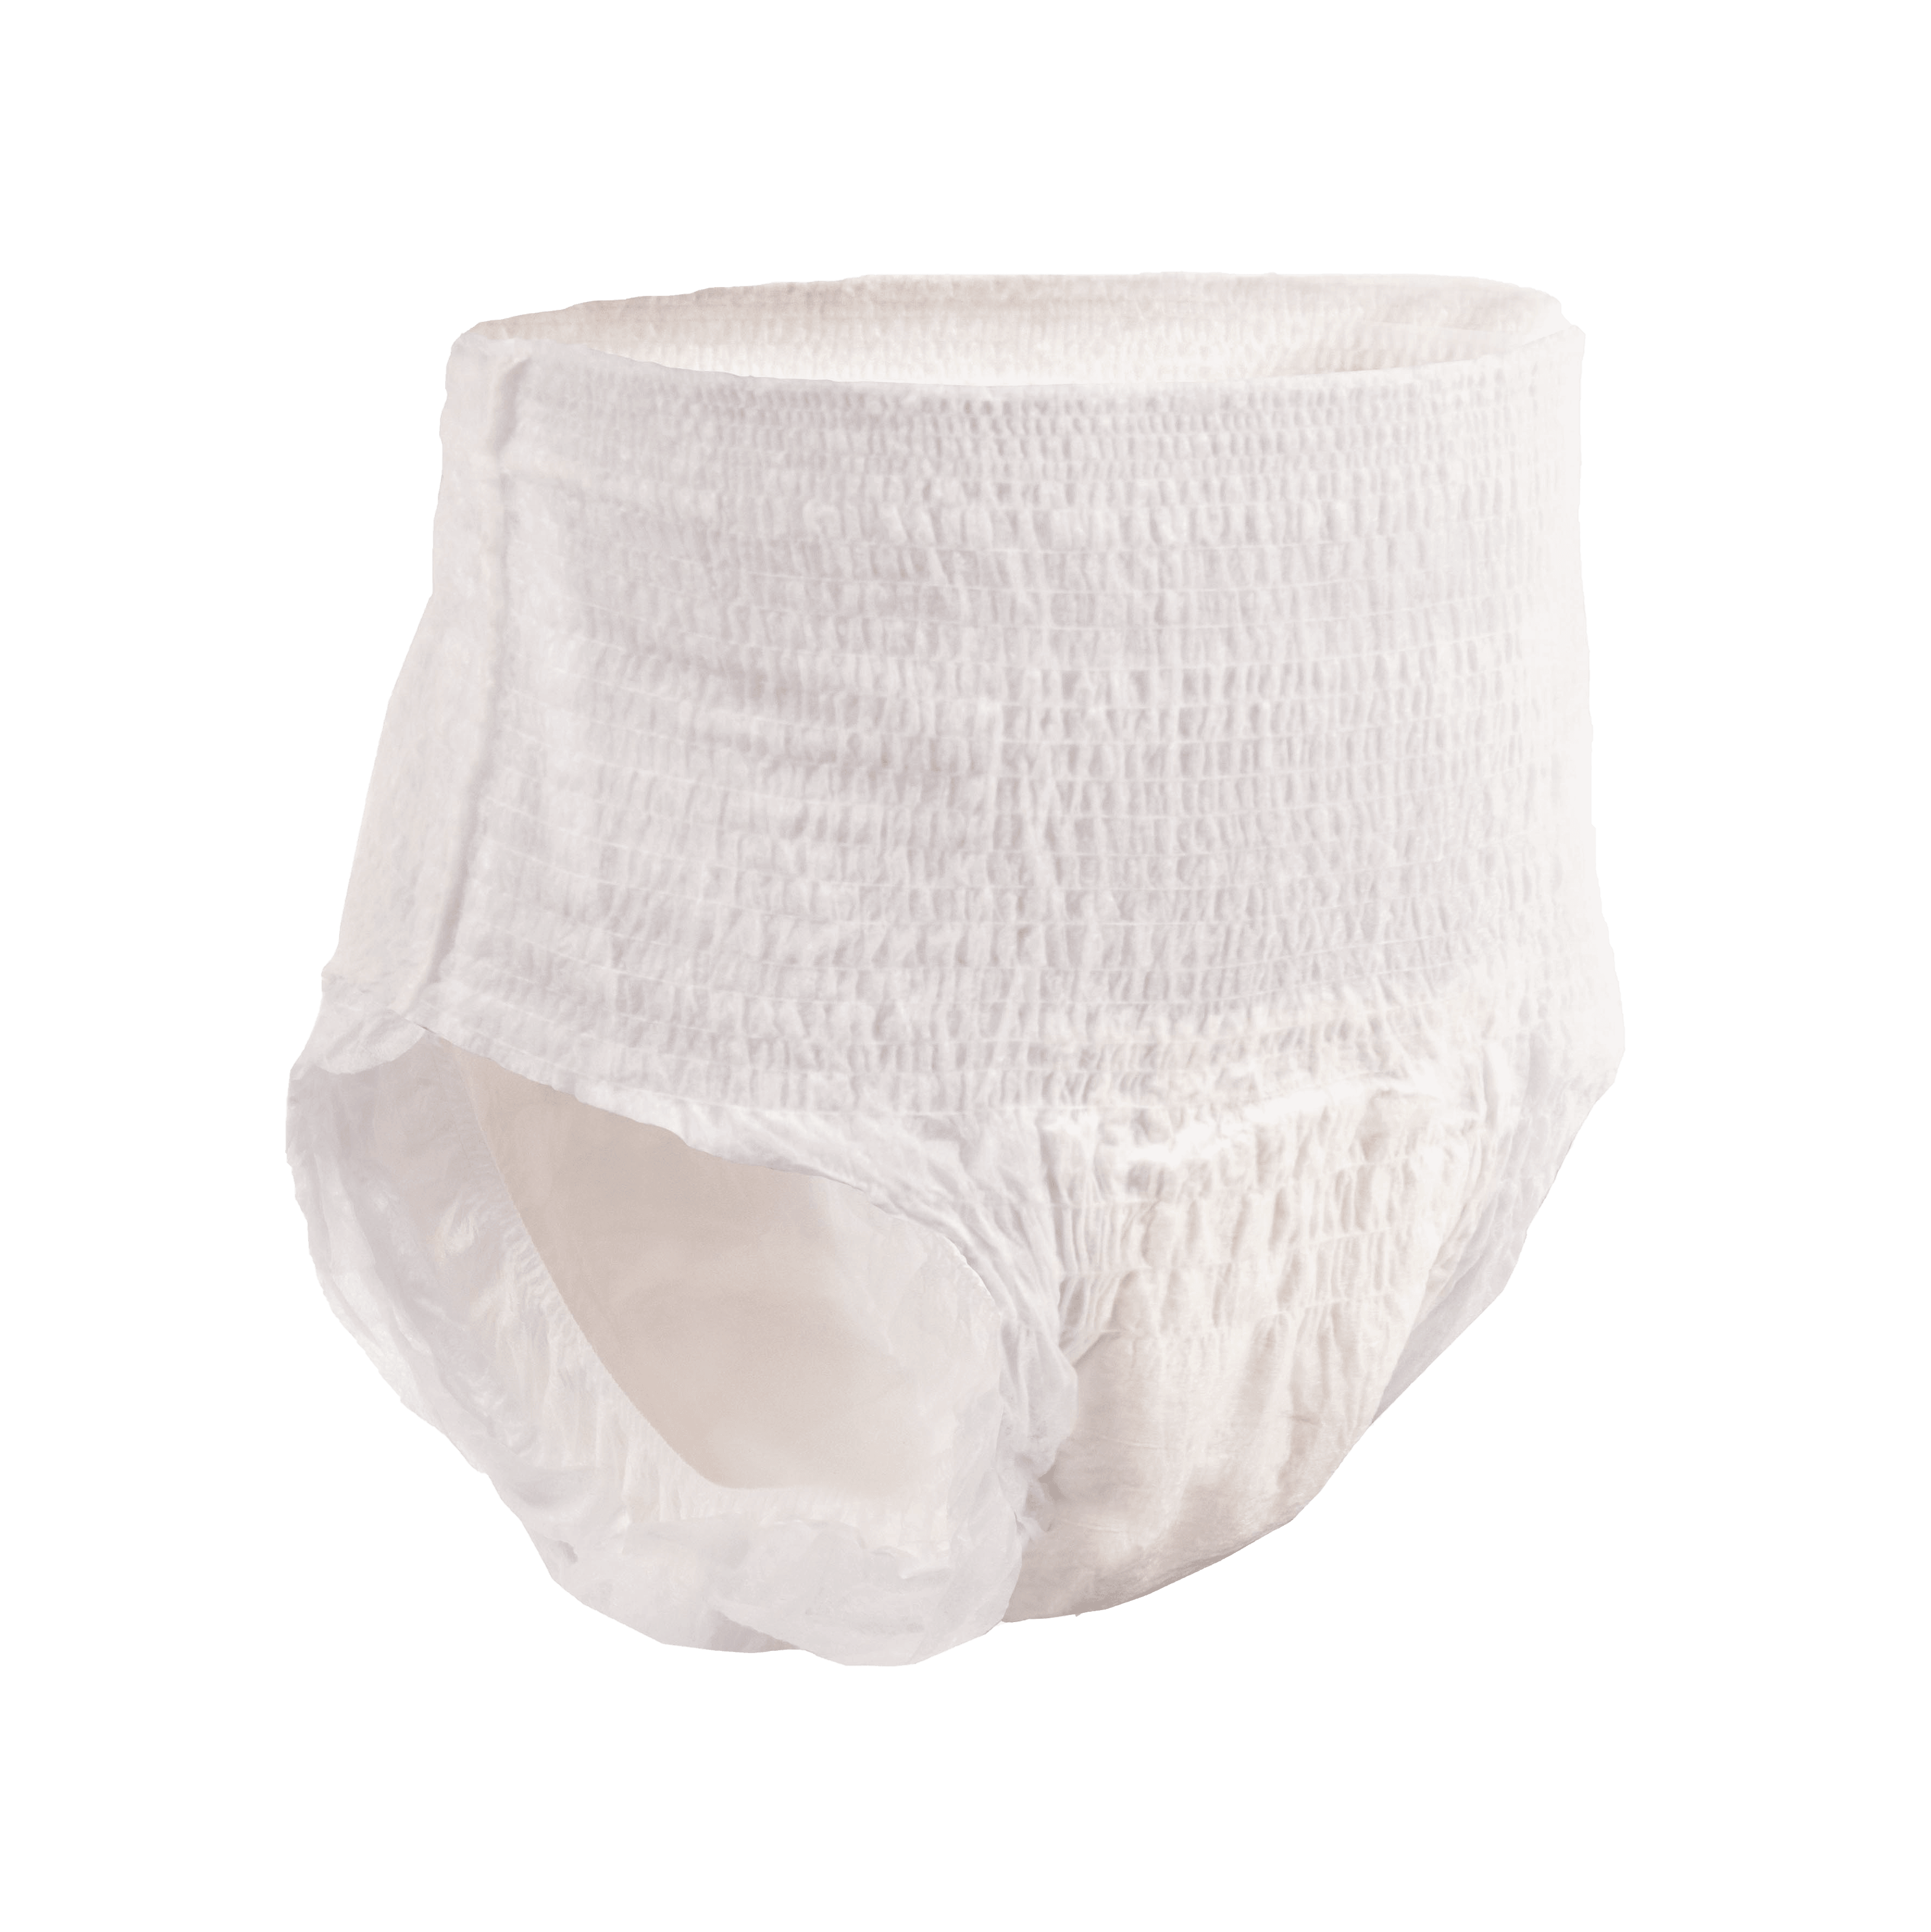 Finding Proper Fit for Incontinence Products Like Absorbent Briefs